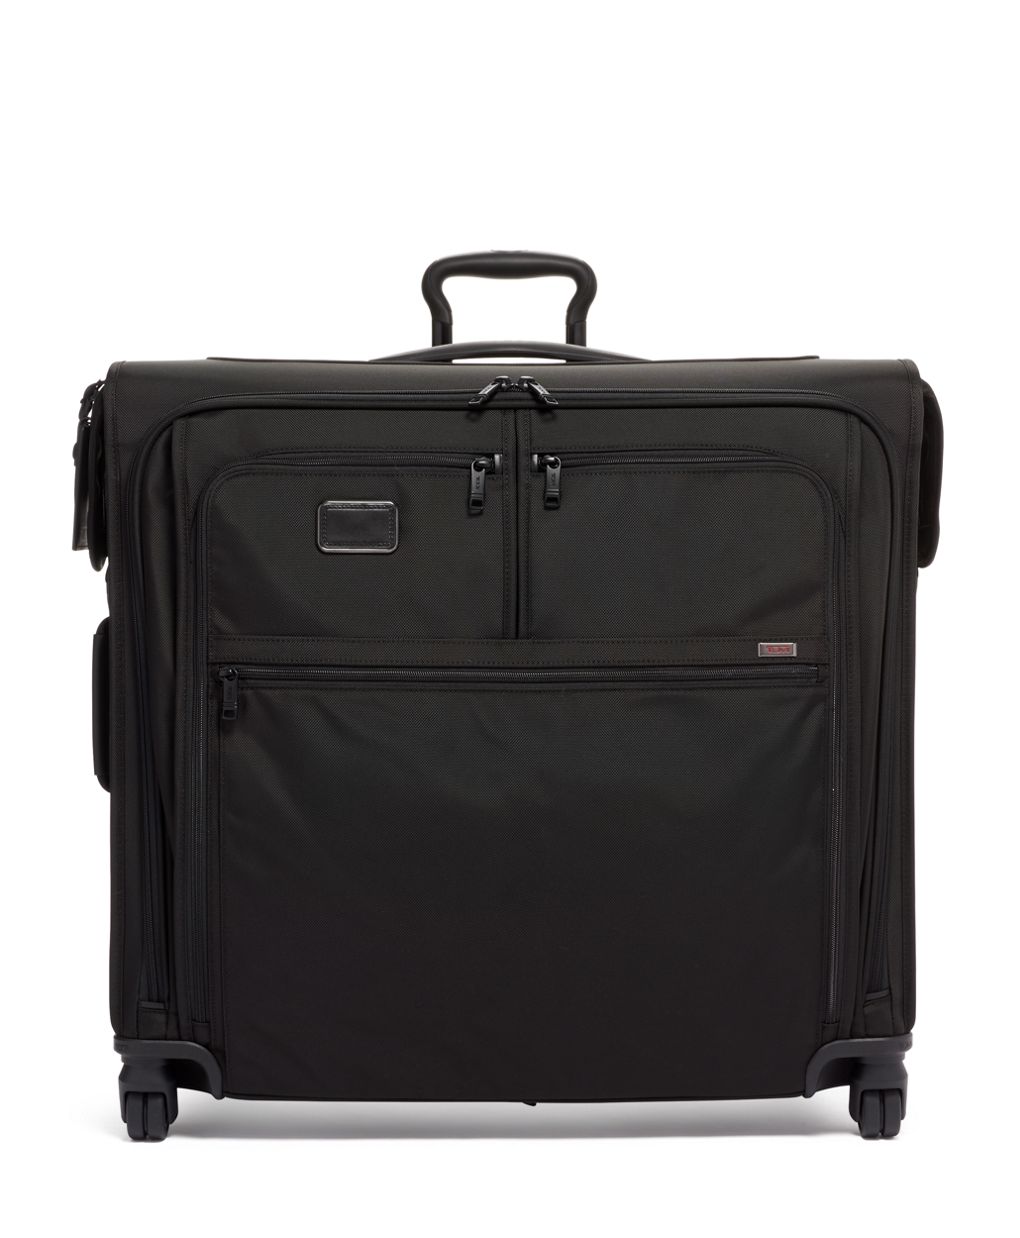 Winners Convertible Suit Garment Bag Carry On Travel Luggage